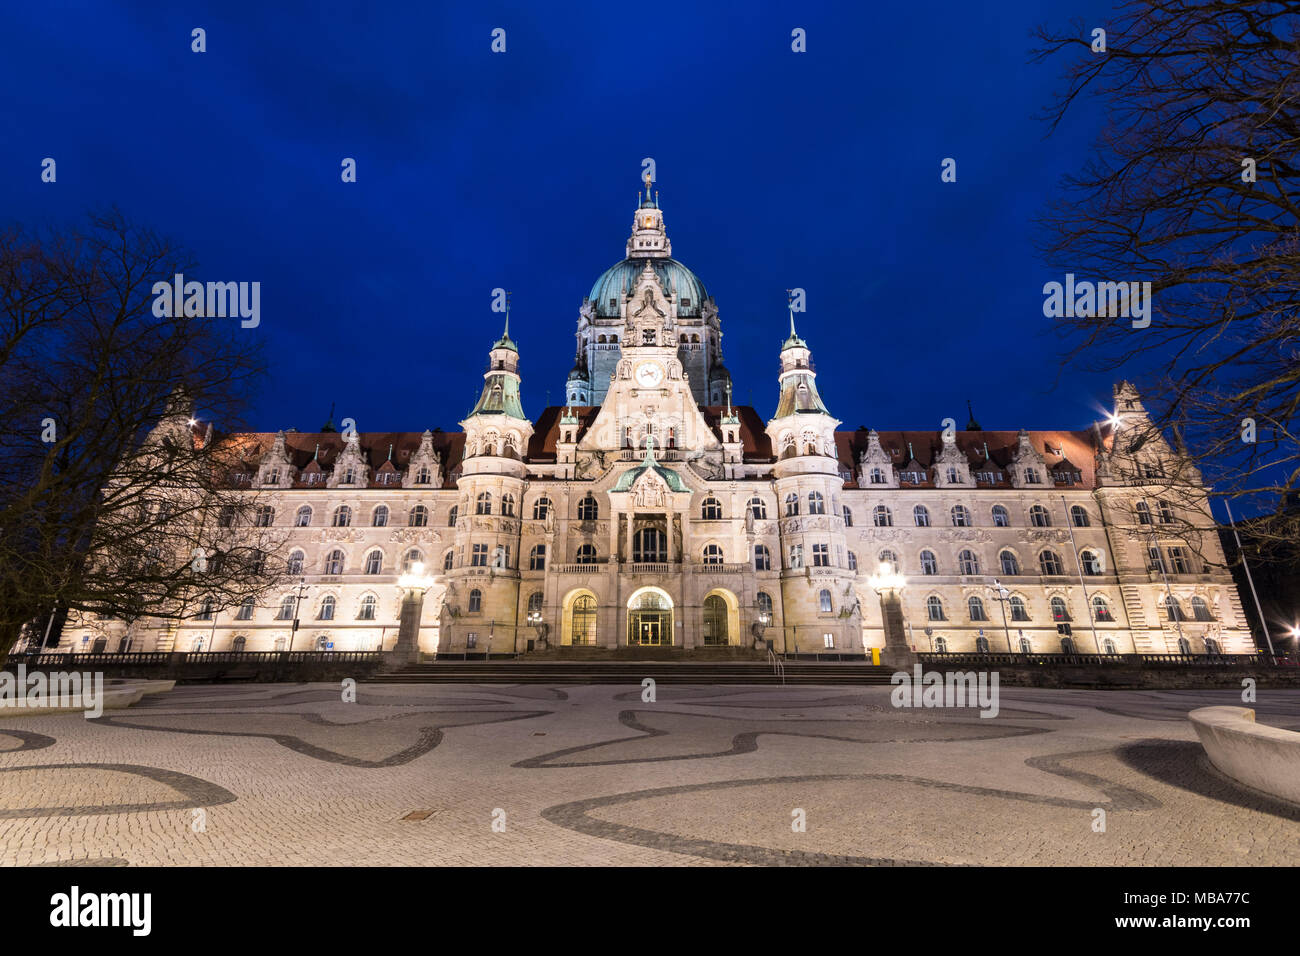 Hannover, Germany. Night view of the New Town Hall (Neues Rathaus), a magnificent castle-like city hall of the era of Wilhelm II in eclectic style Stock Photo